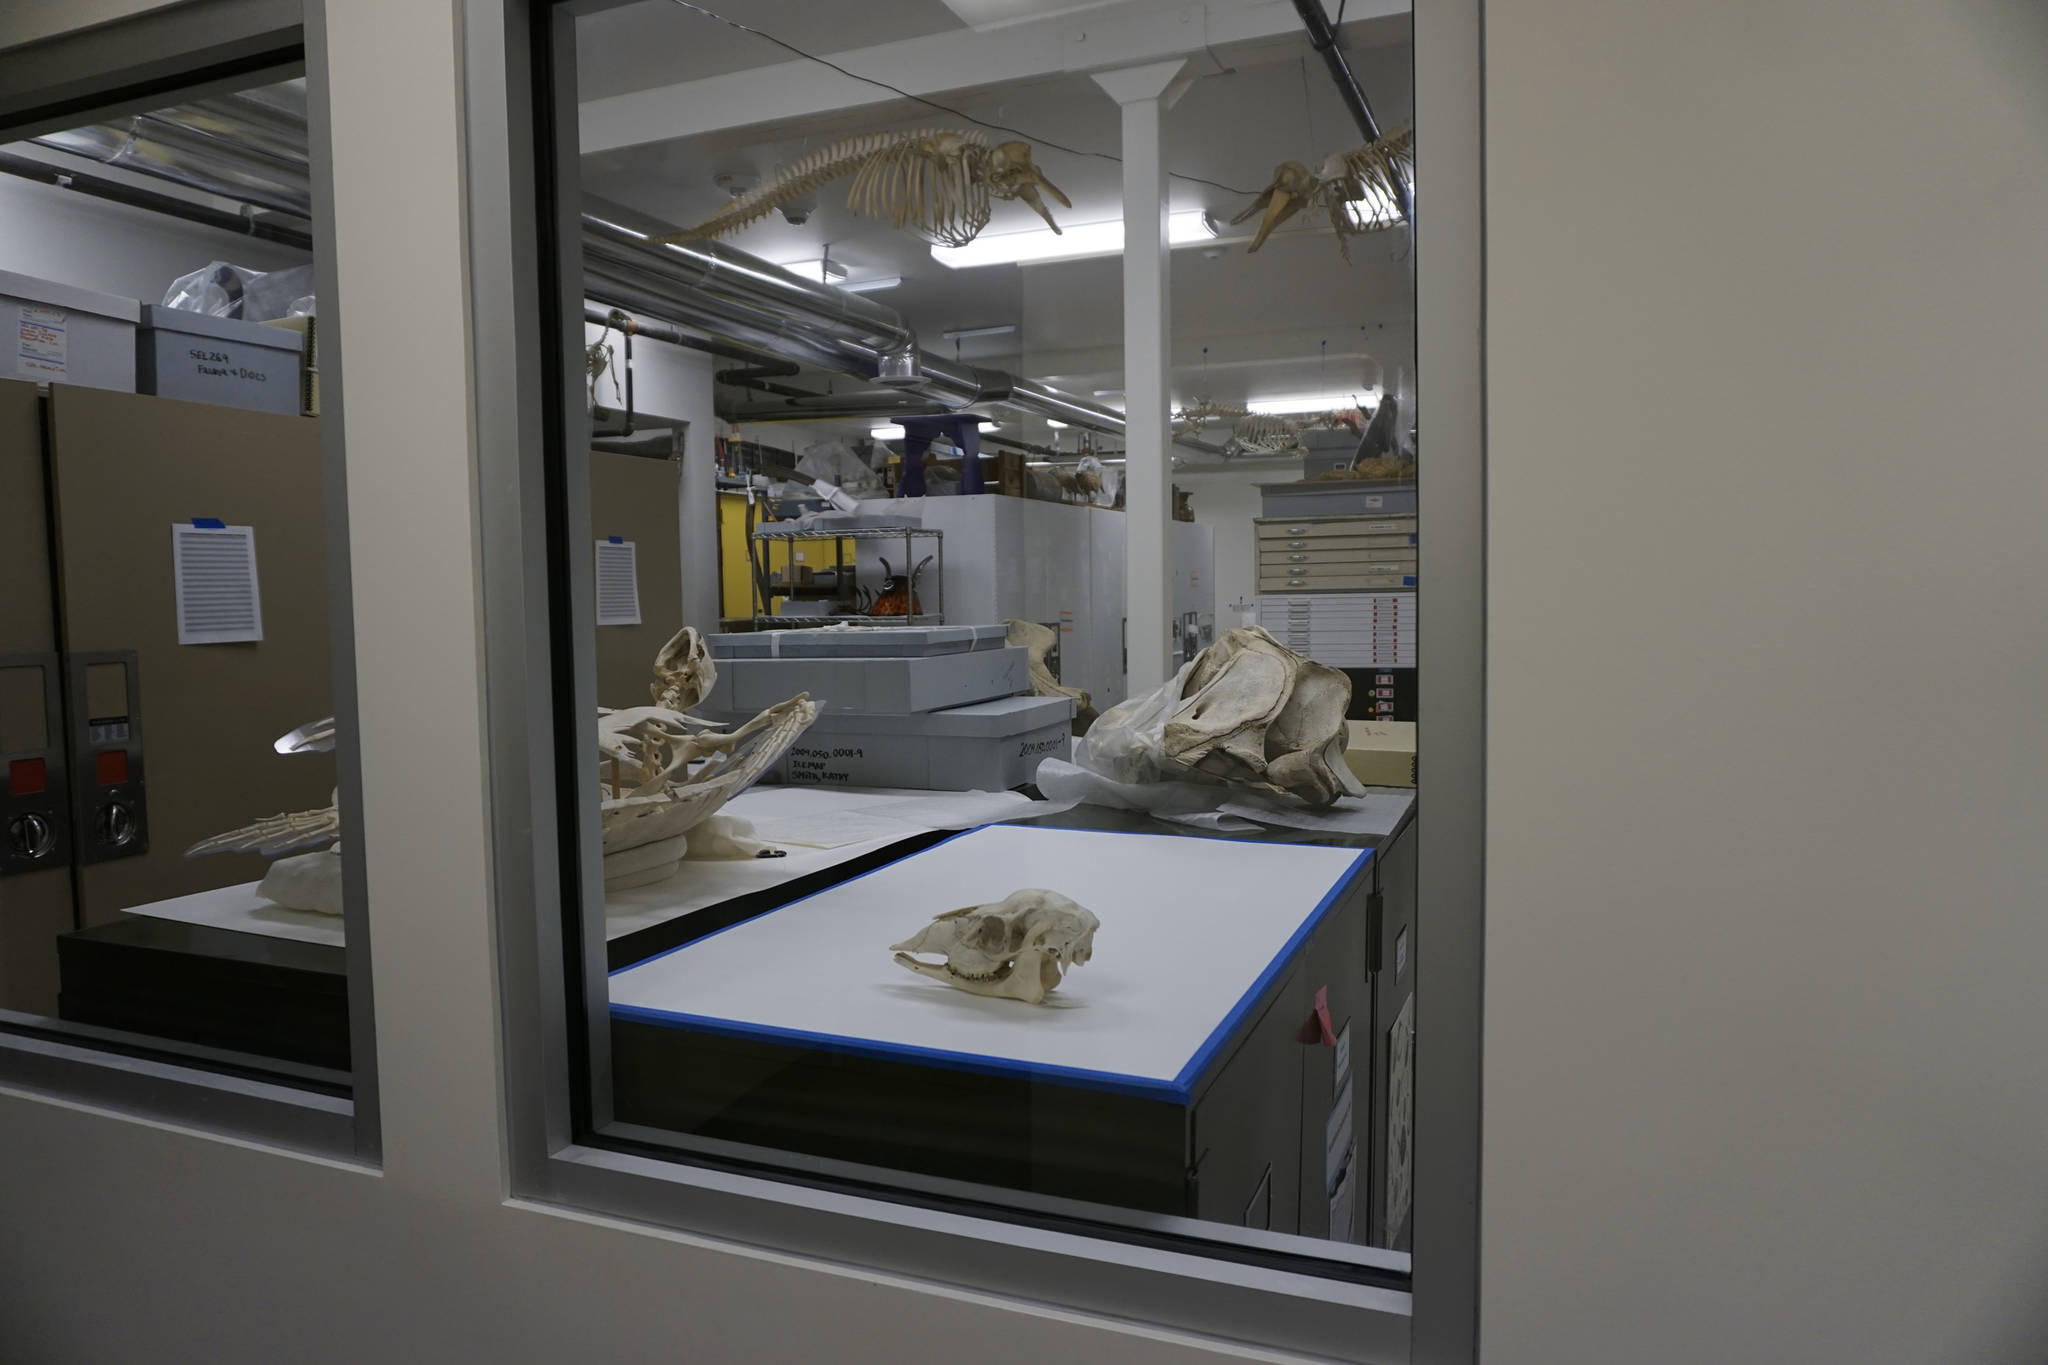 Windows into the Pratt Museum collections area allow visitors to look into the area without disturbing delicate artifacts, as seen on May 28, 2019, in Homer, Alaska. (Photo by MIchael Armstrong/Homer News)